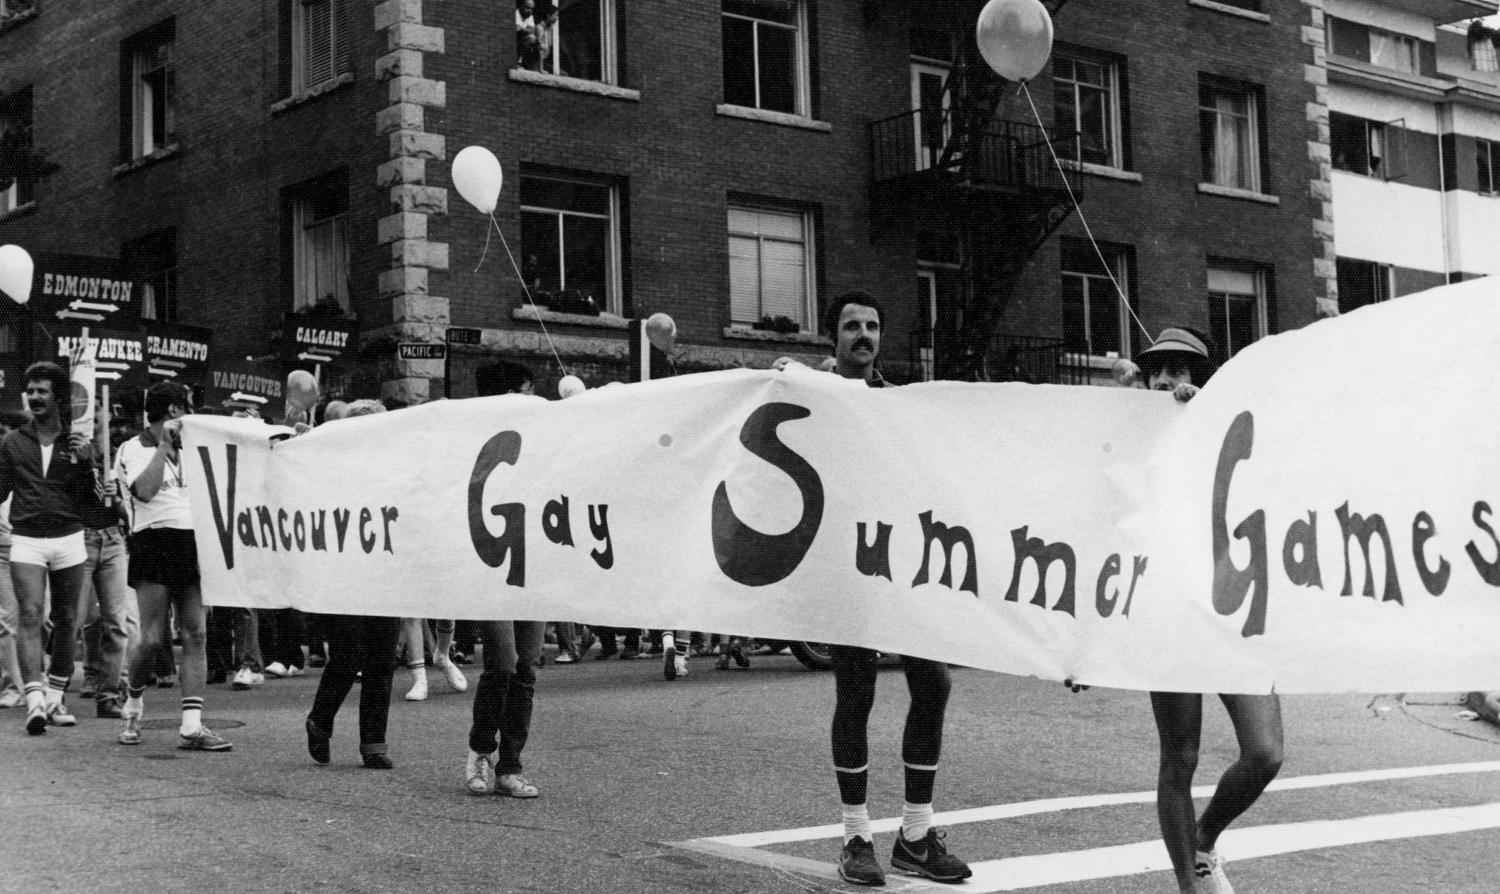 People crossing a street bearing a banner reading "Vancouver Gay Summer Games"